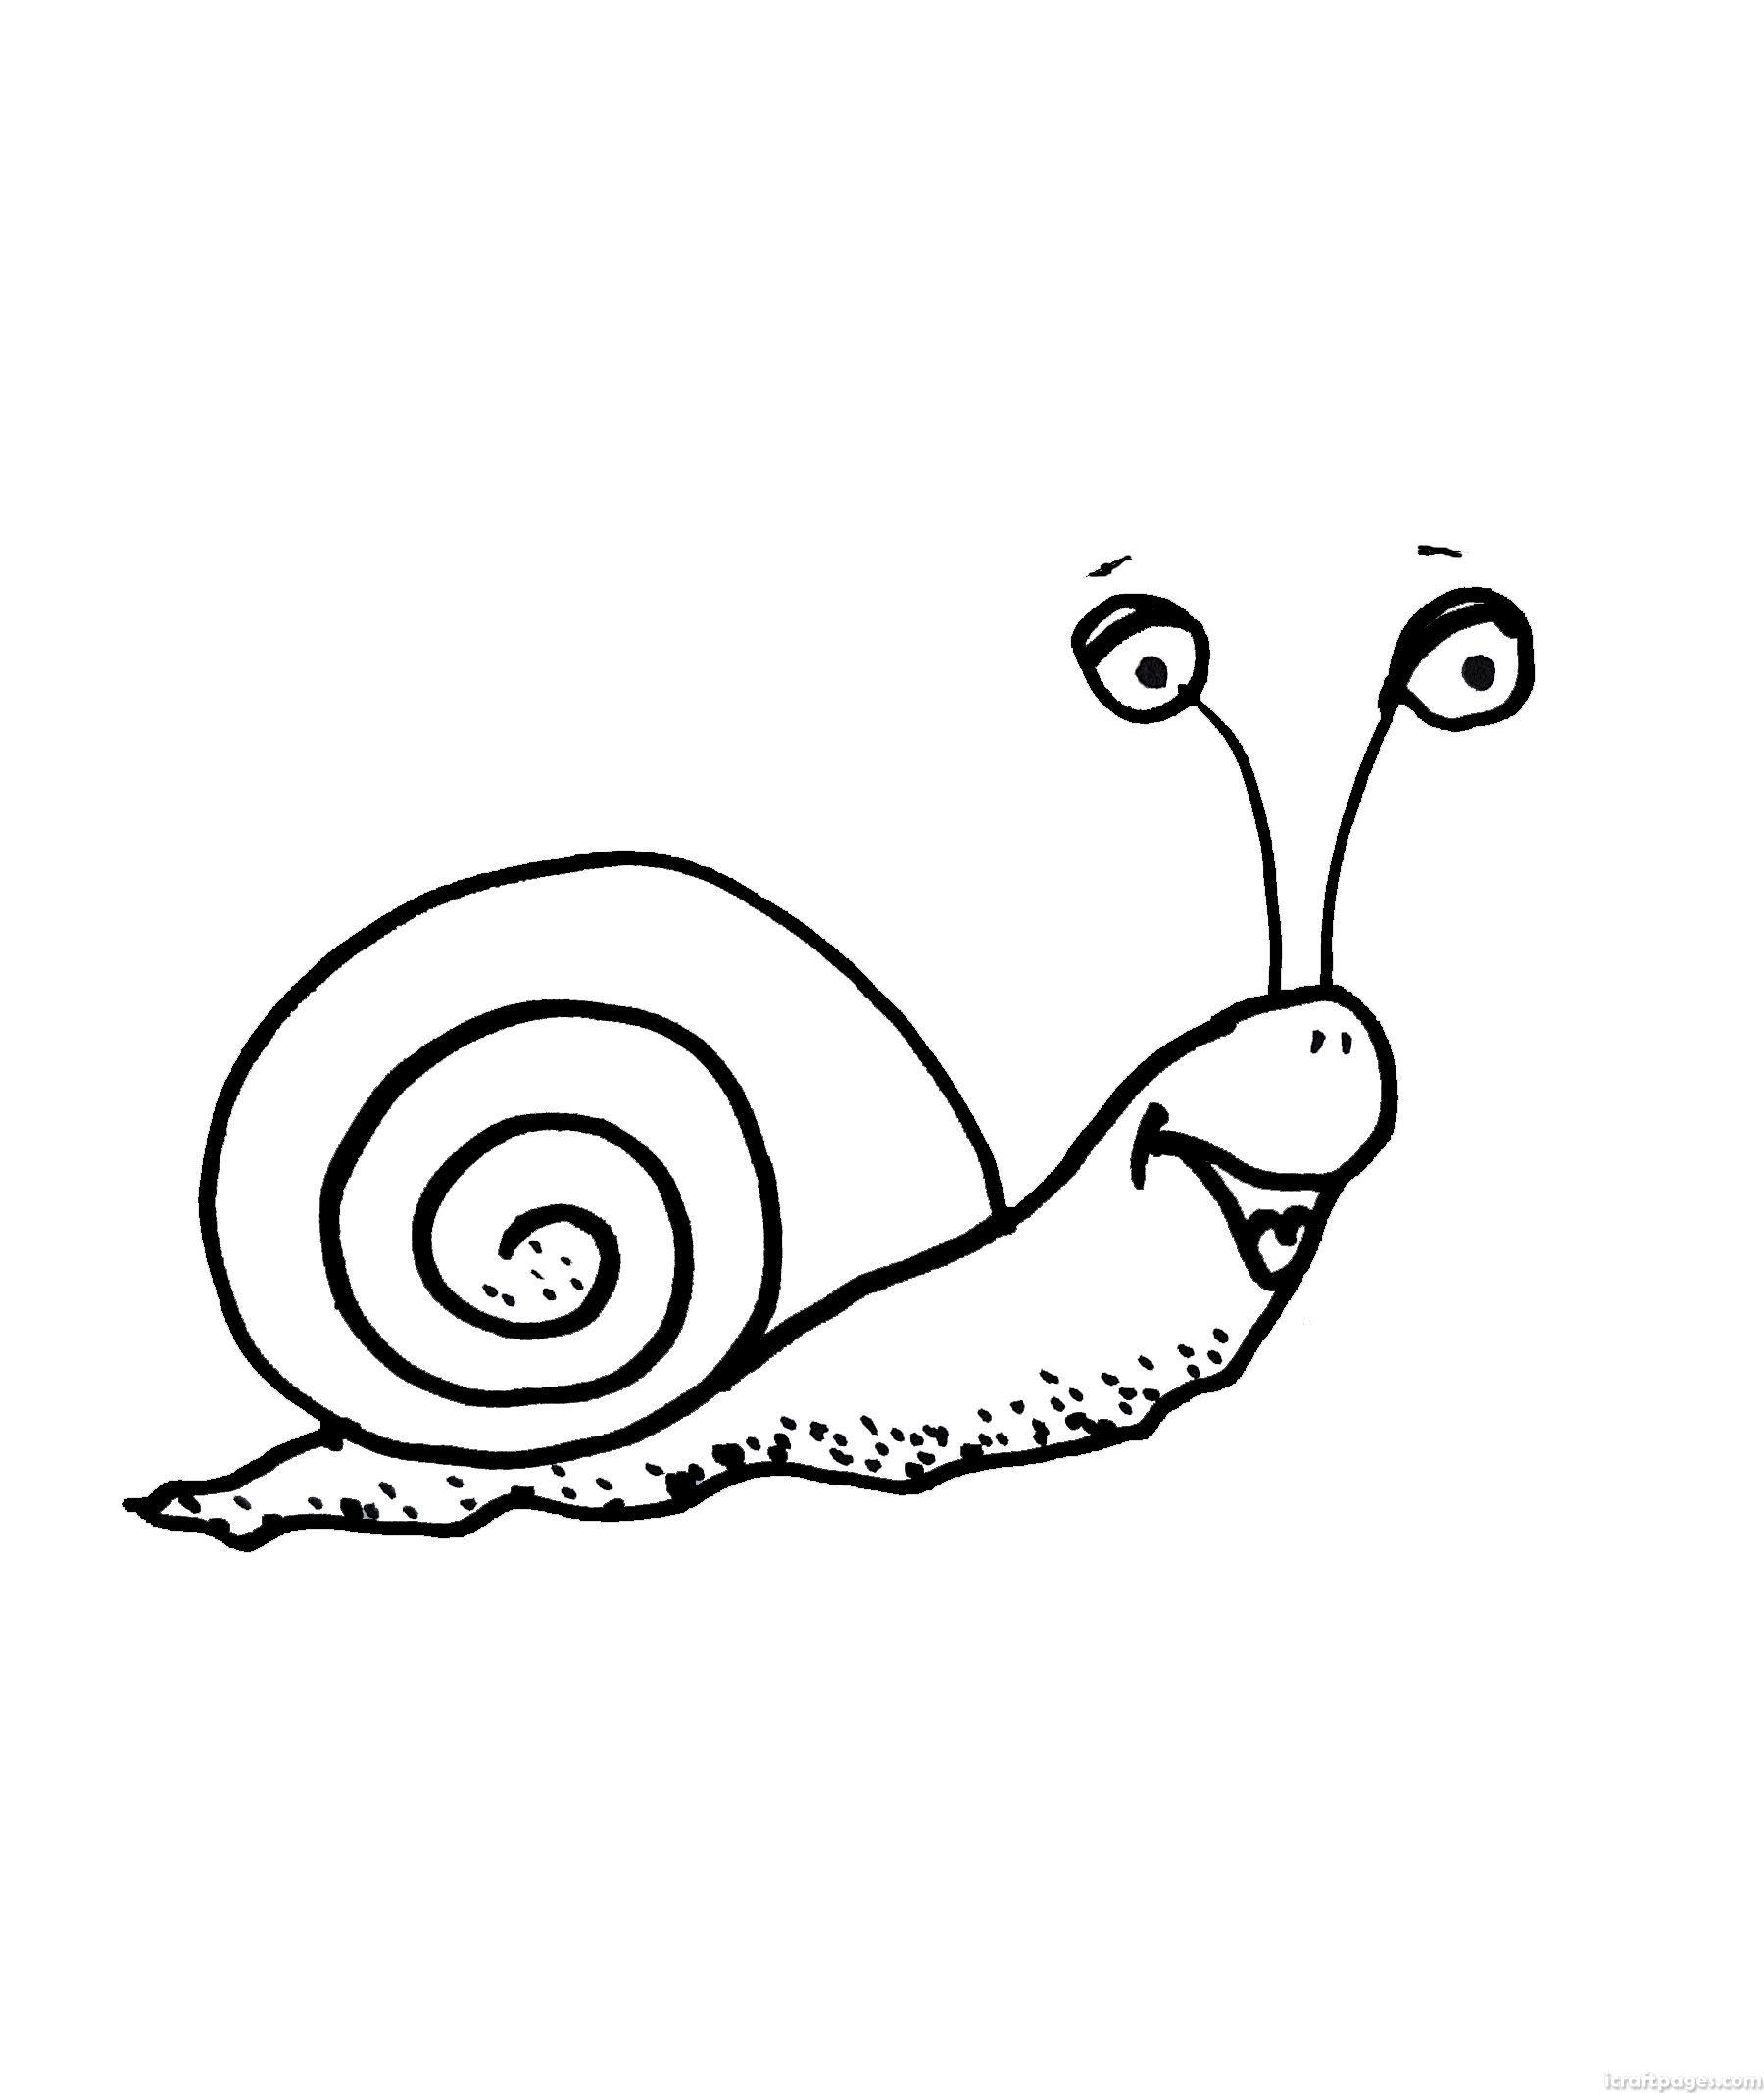 How to draw a cute snail coloring page